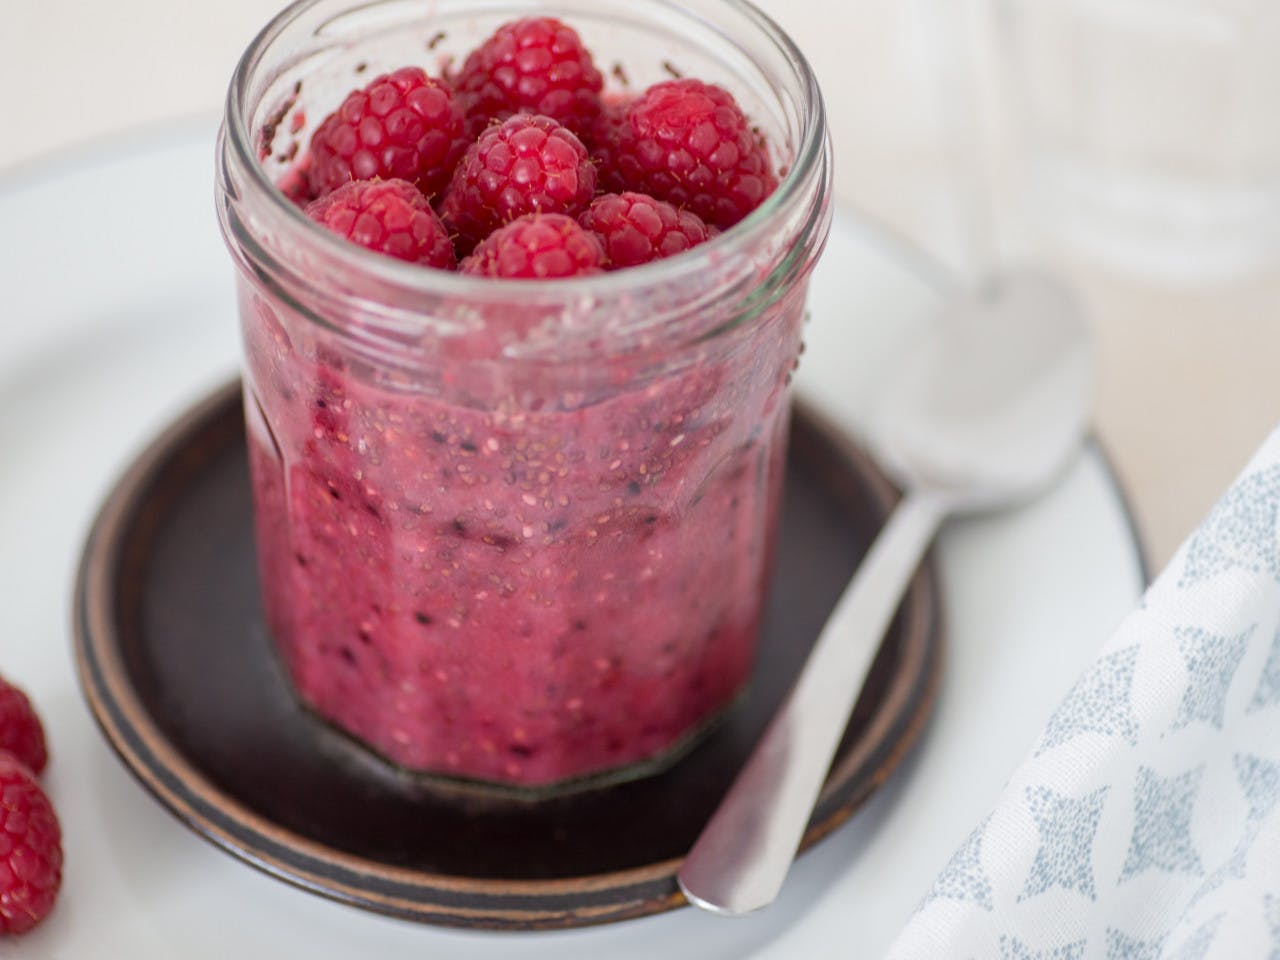 Chia pudding with forest berries.